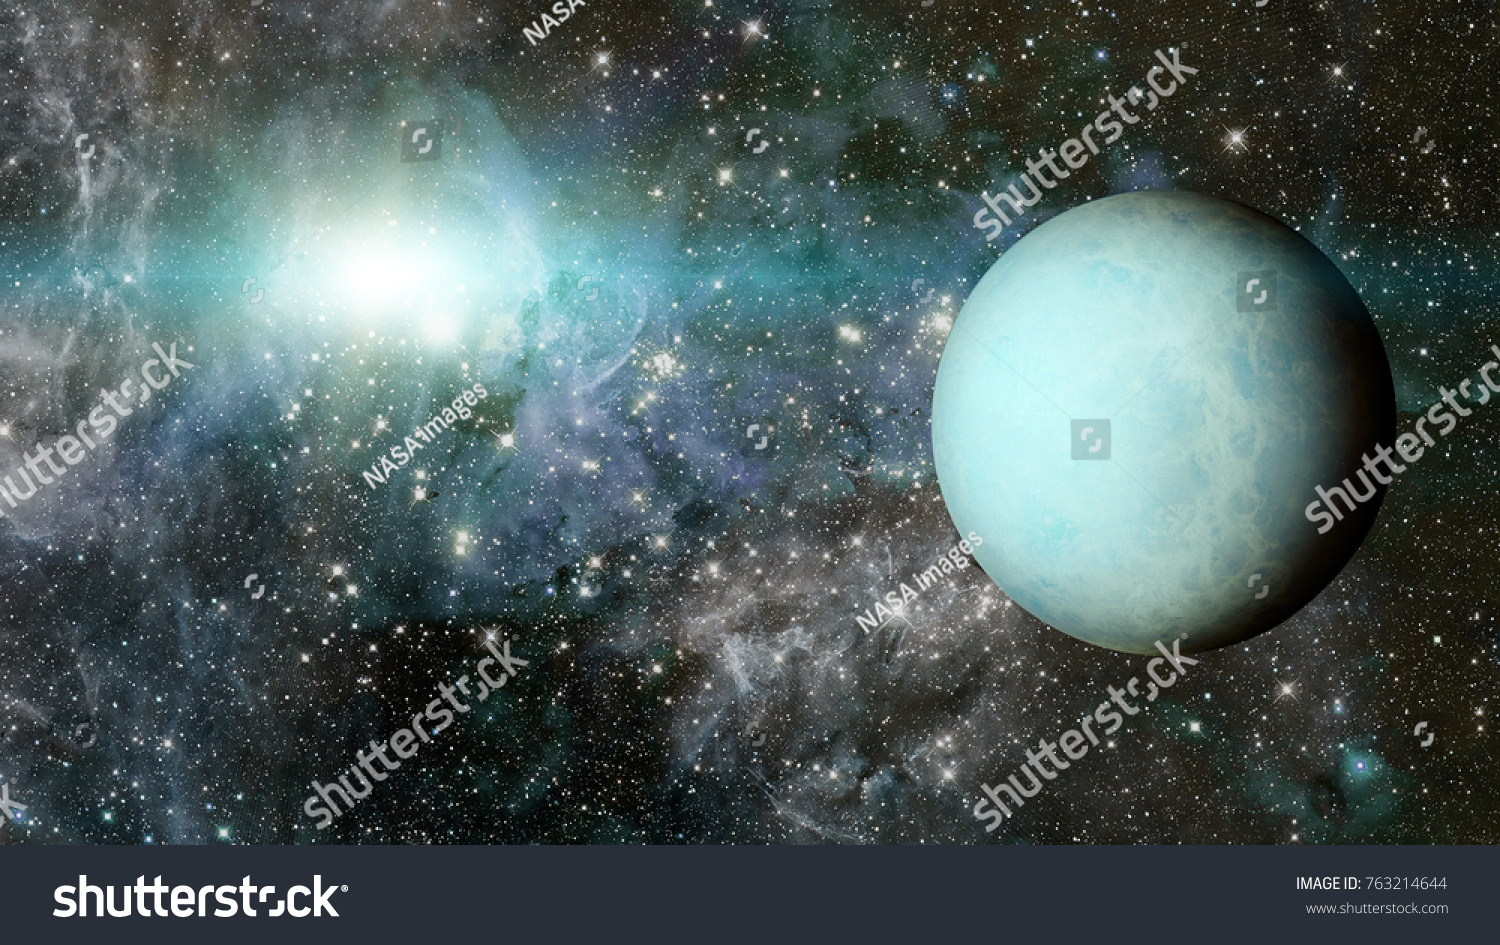 Planet Uranus. Elements of this image furnished by NASA. #763214644